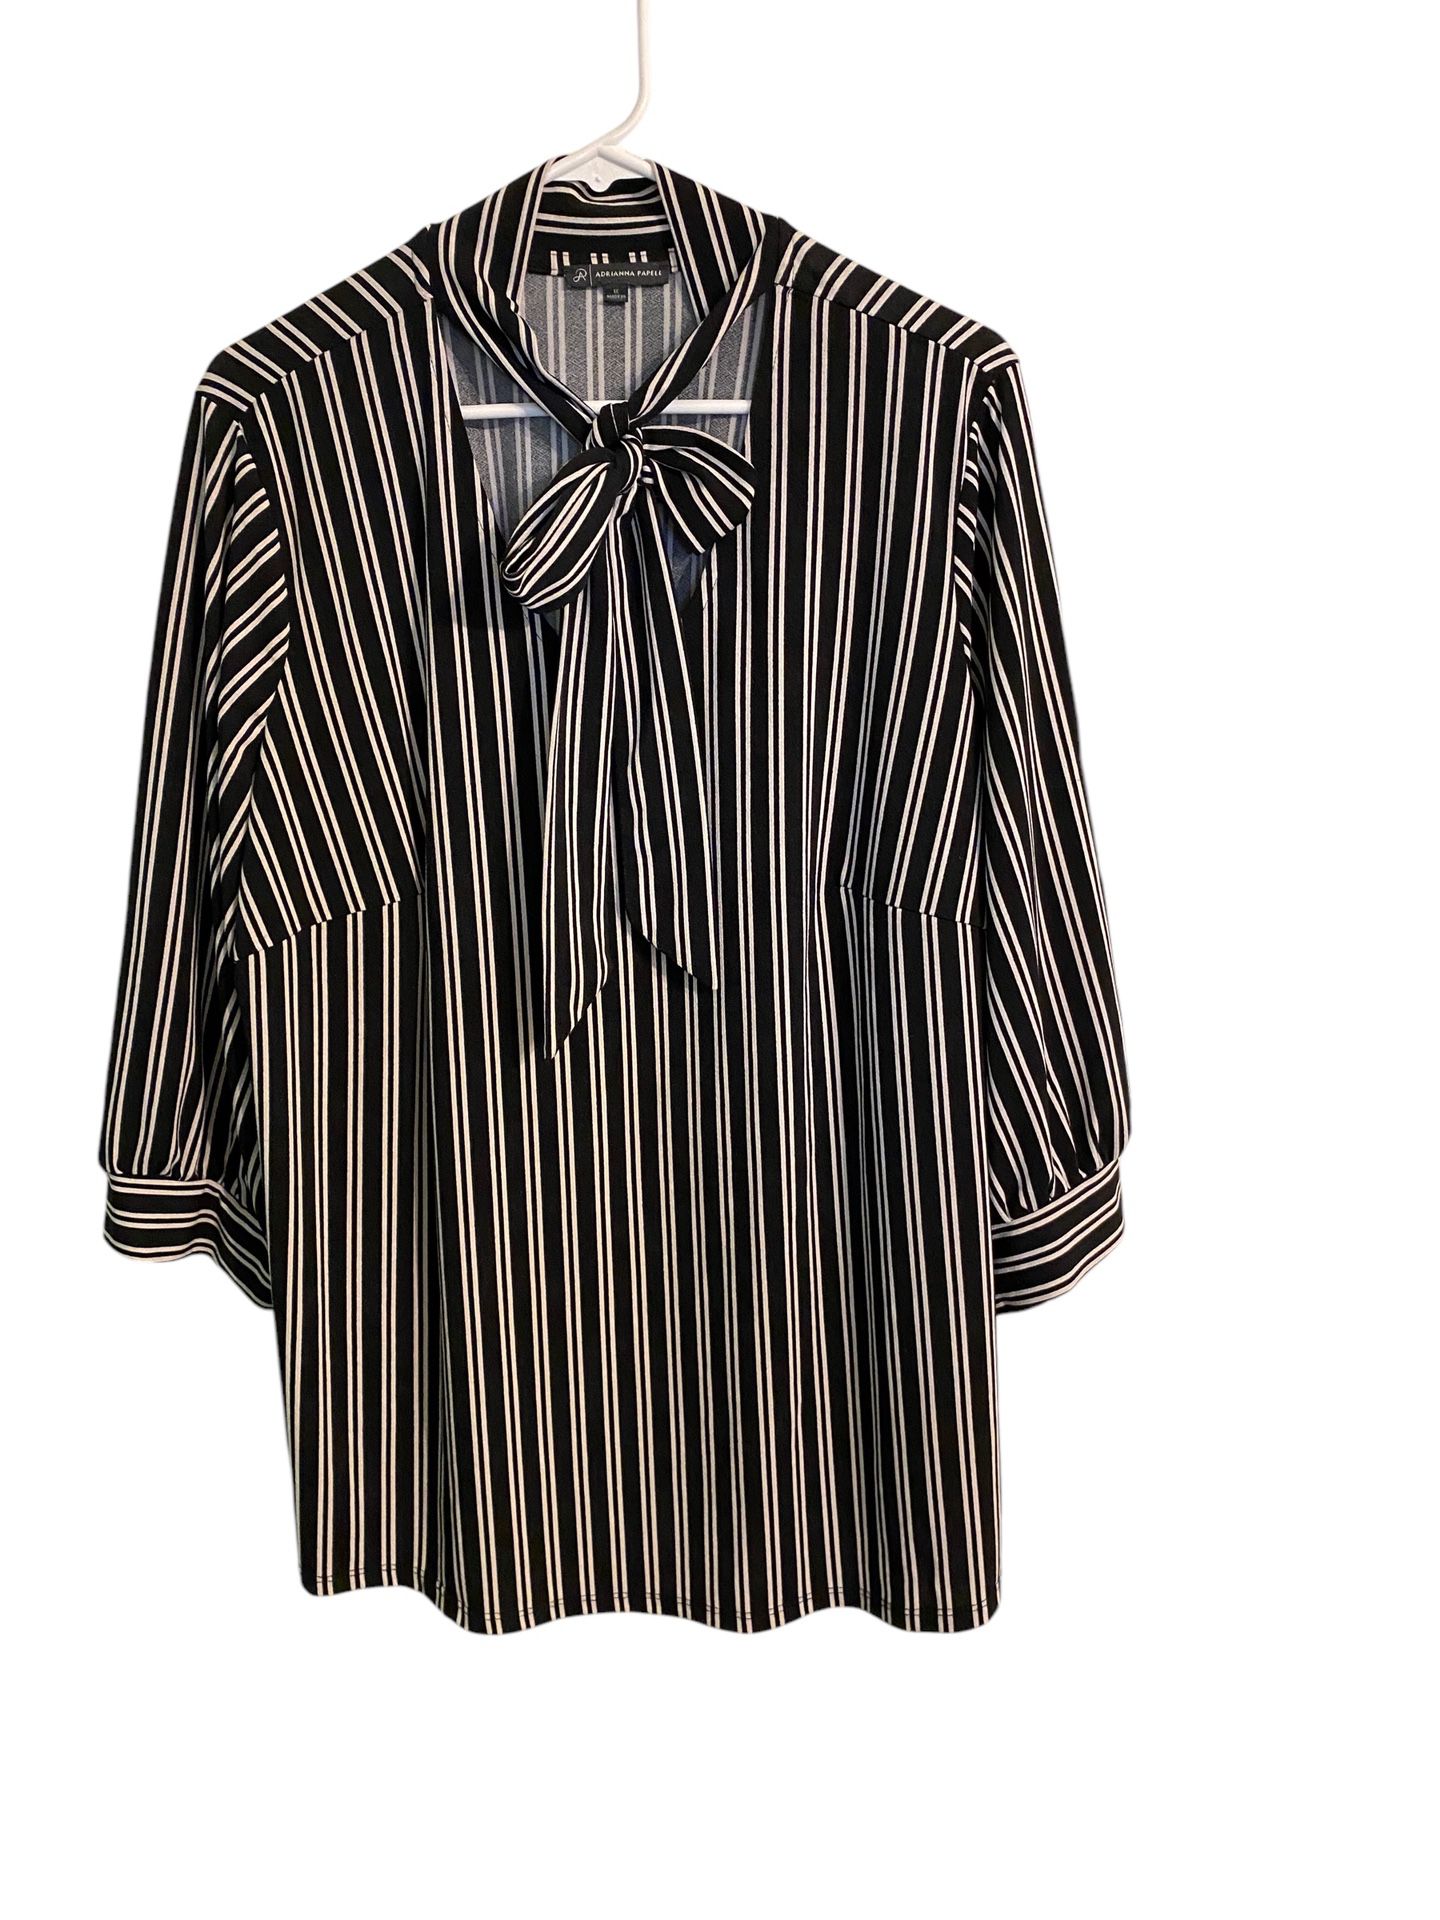 Adrianna Papell Women’s Black And White Striped Blouse, Size Xl